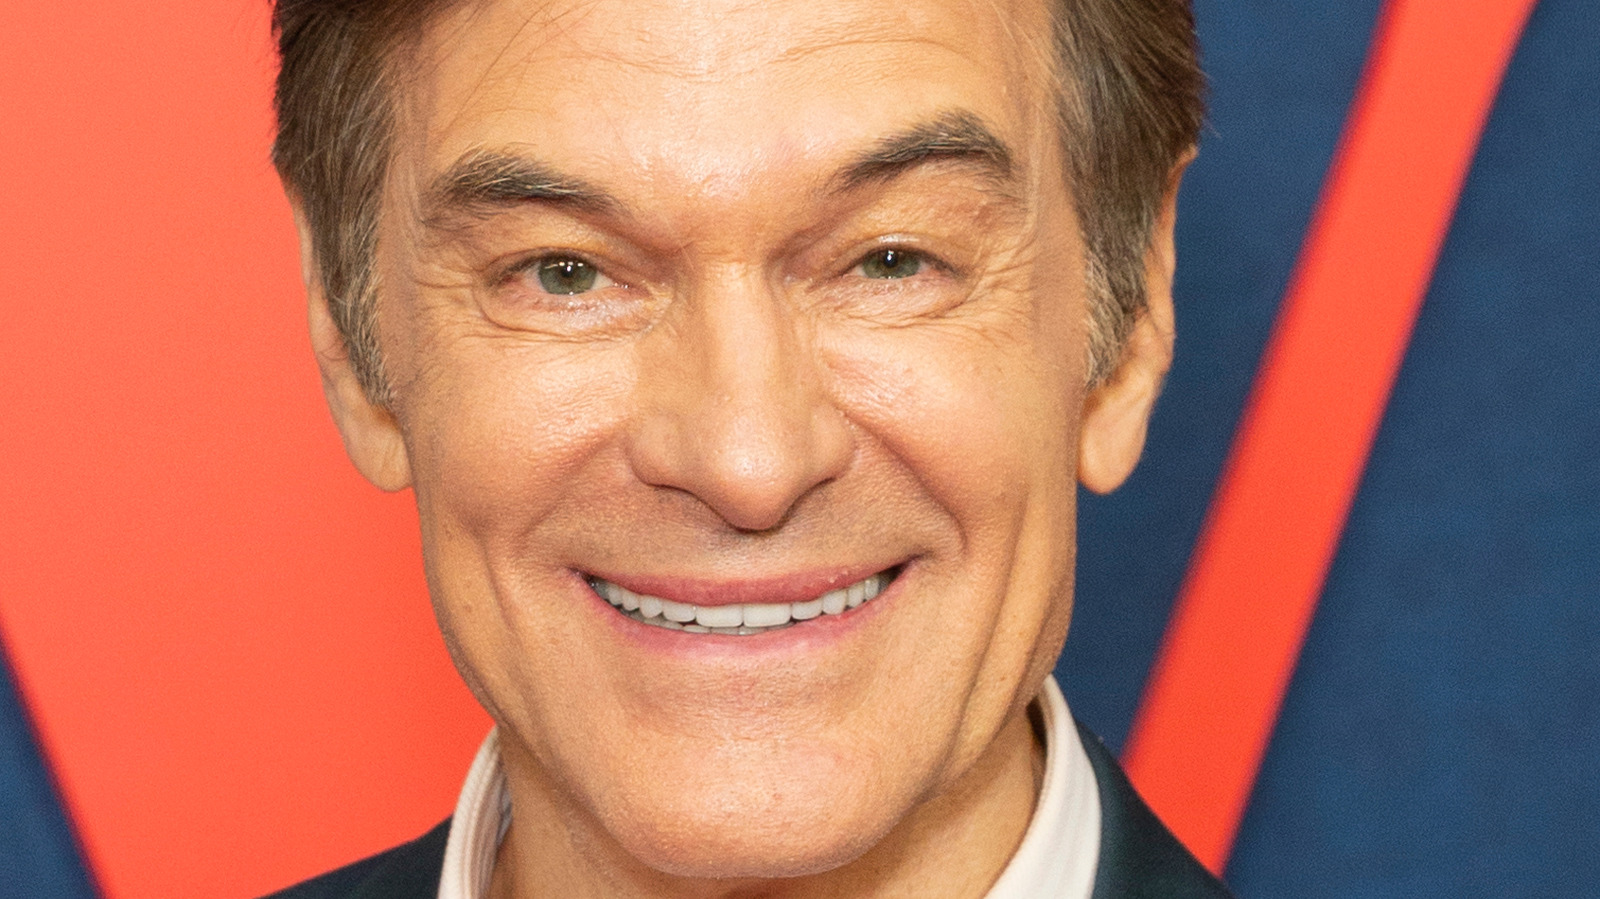 Dr. Oz's Bold New Look: Blue Hair - wide 3